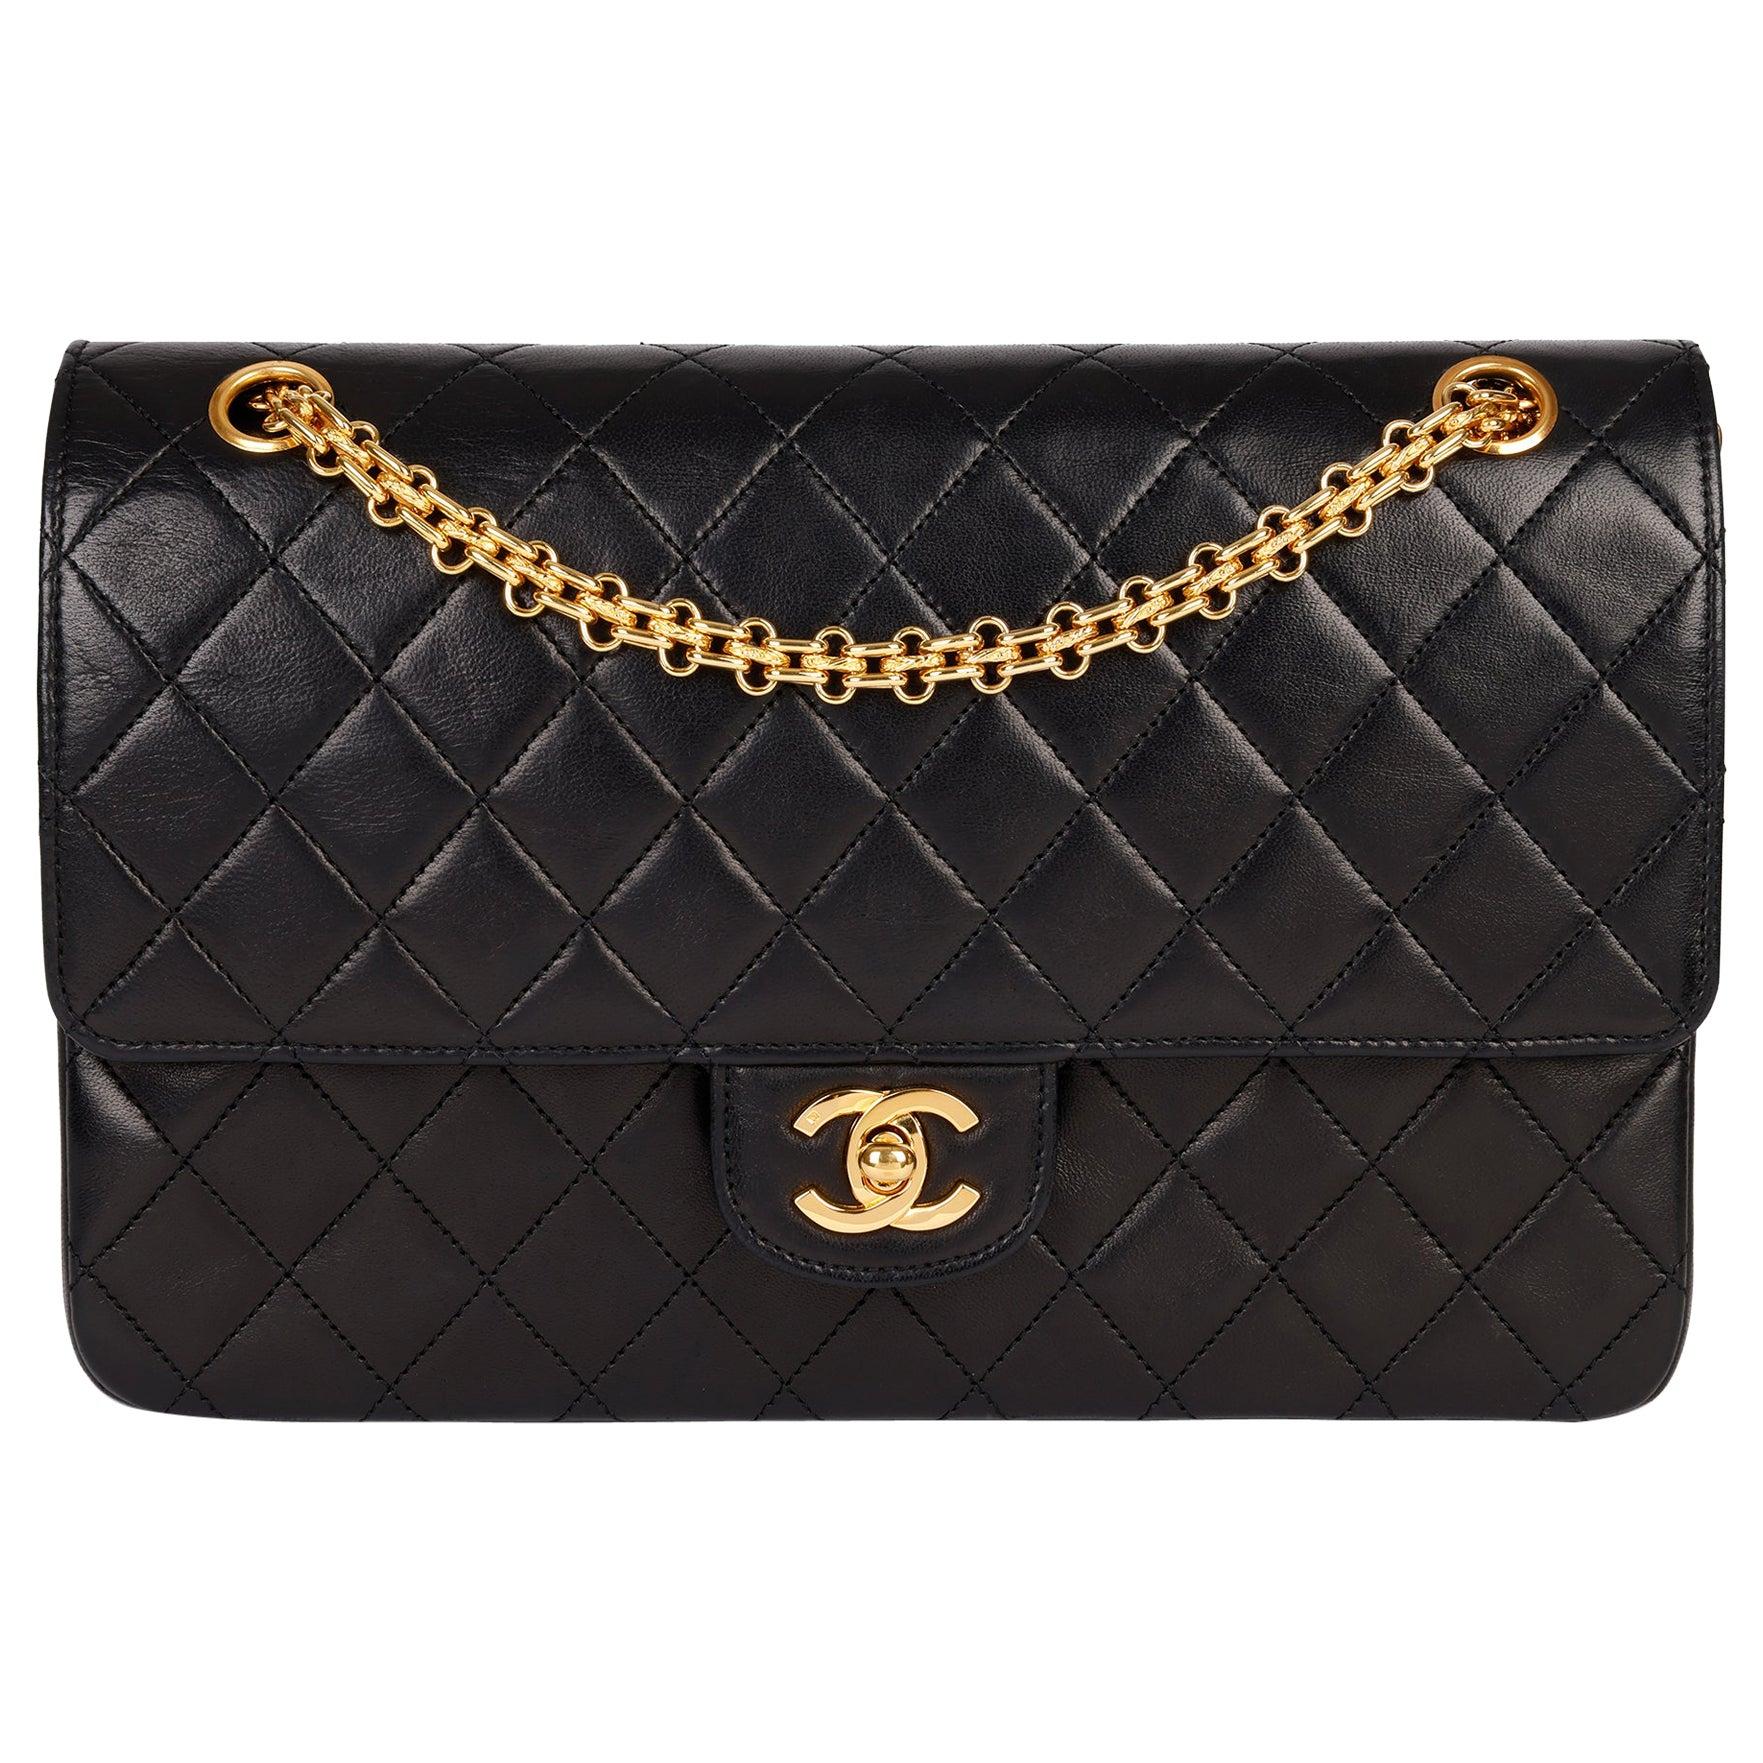 1999 Chanel Black Quilted Lambskin Leather Vintage Classic Double Flap Bag